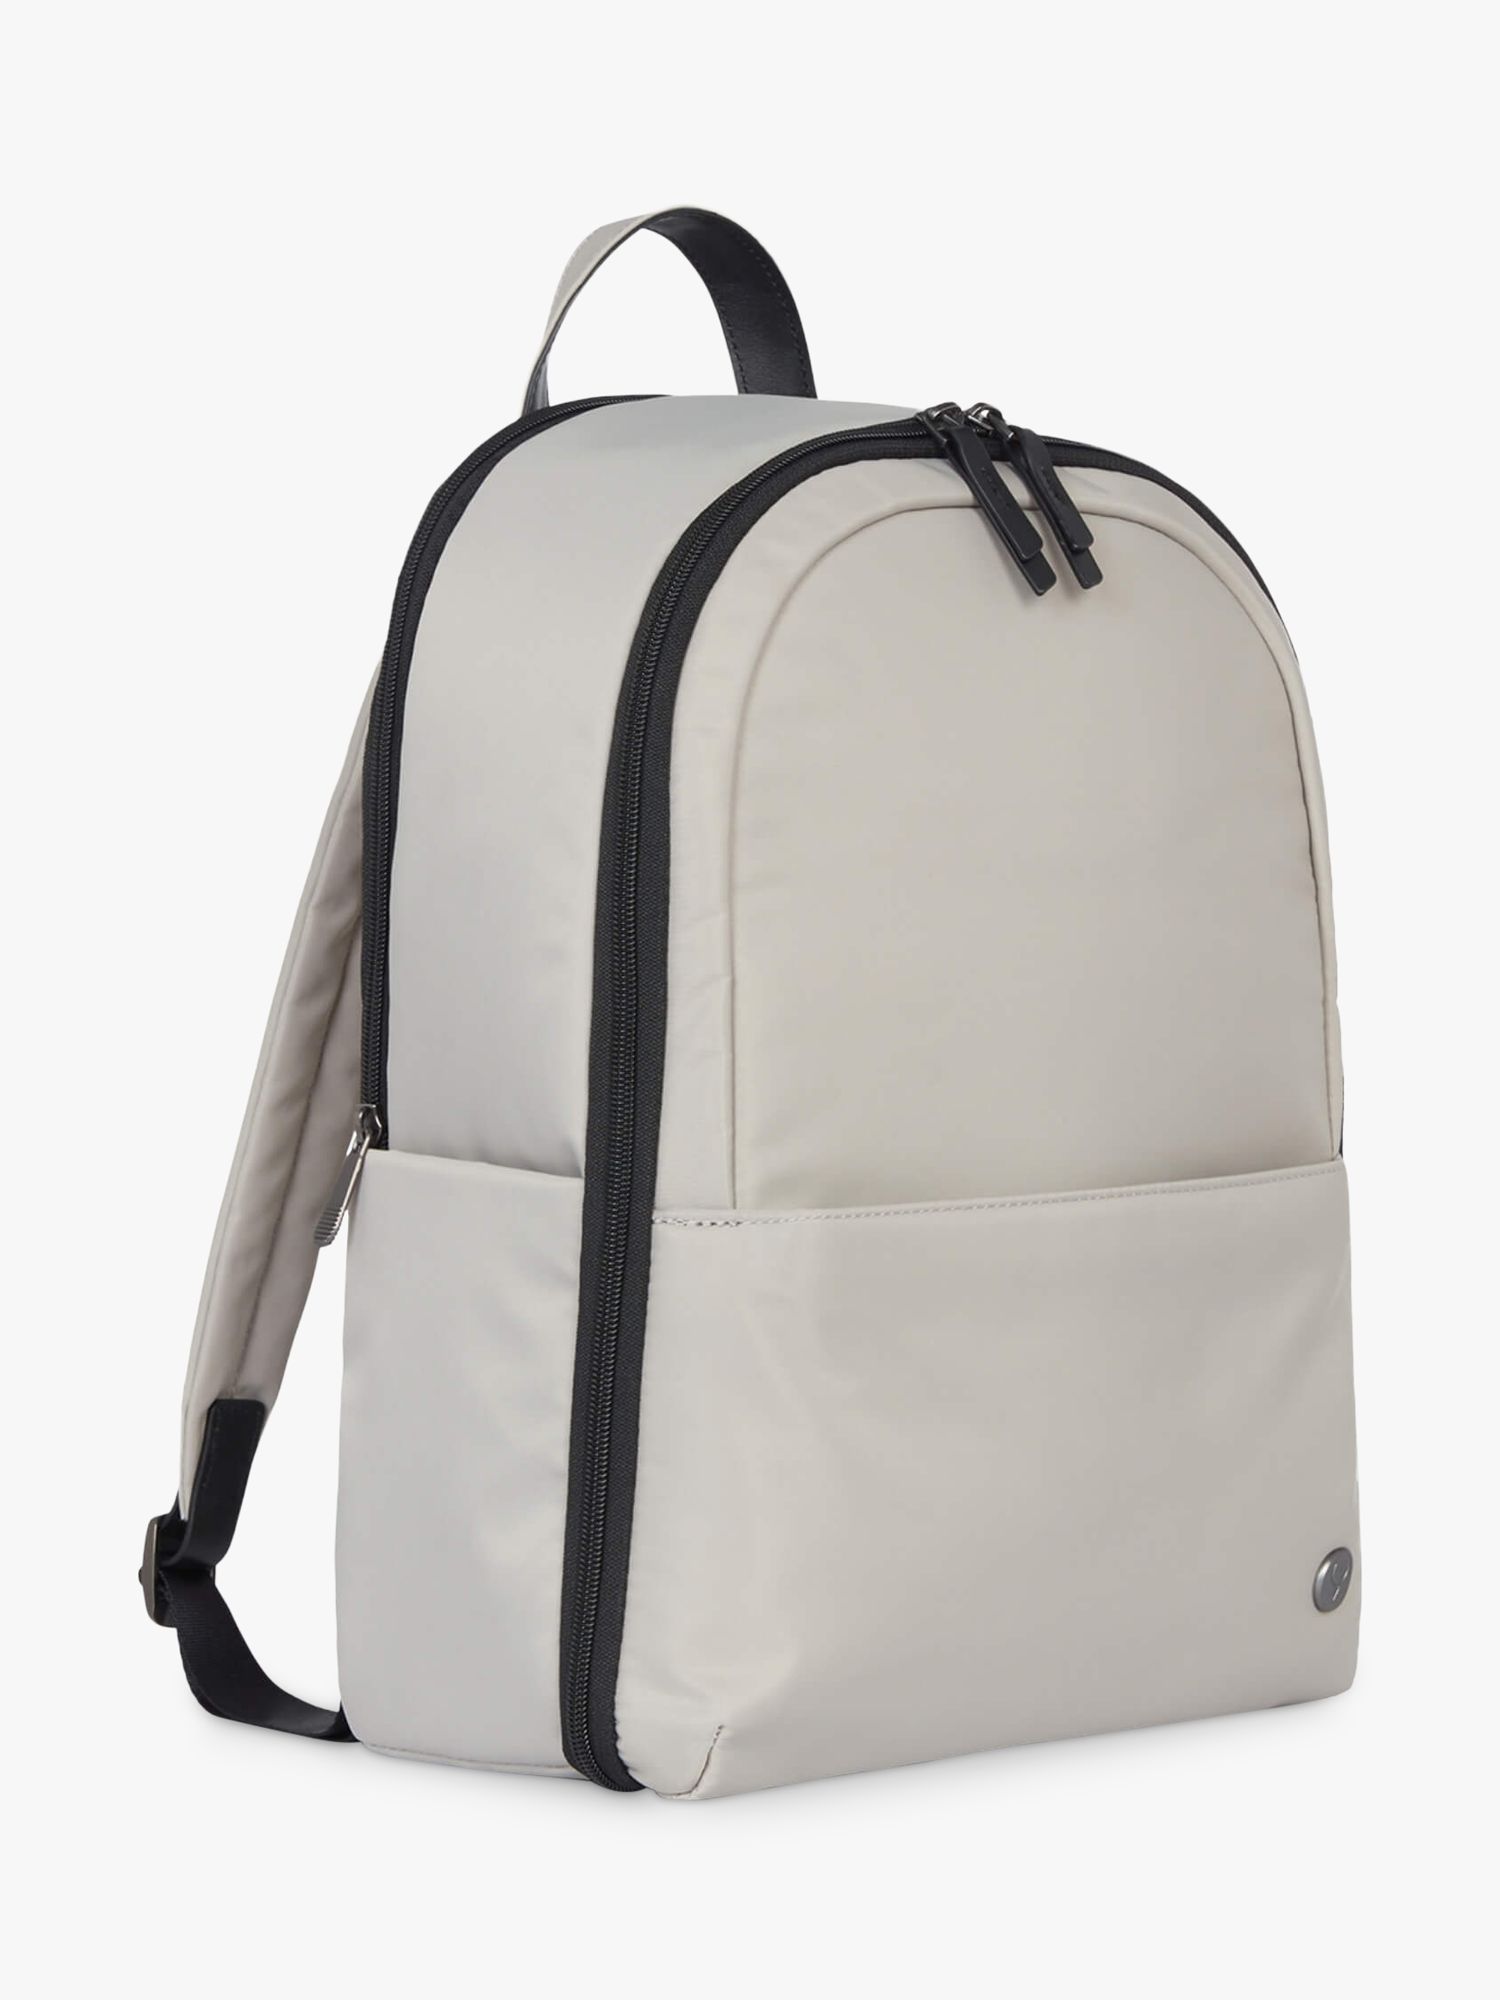 Antler Chelsea Backpack, Taupe at John Lewis & Partners